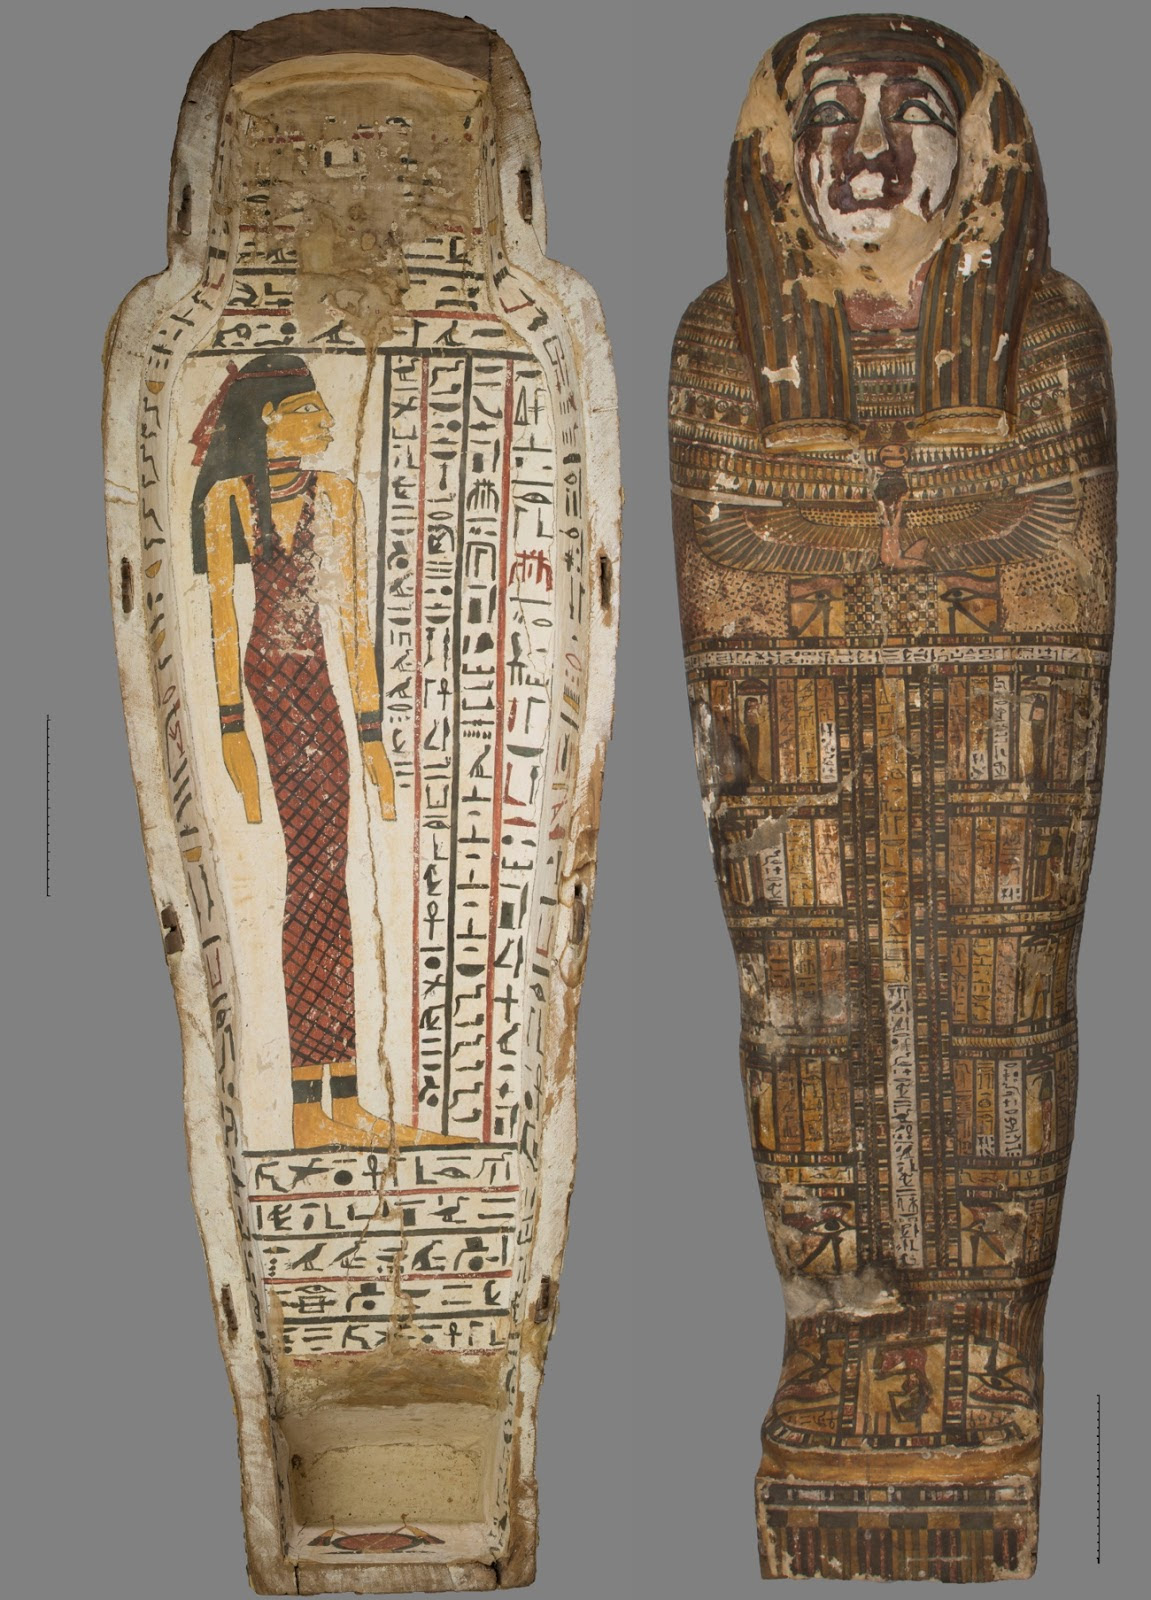 Egypt Centre Collection Blog Mummification and Coffins in Ancient Egypt